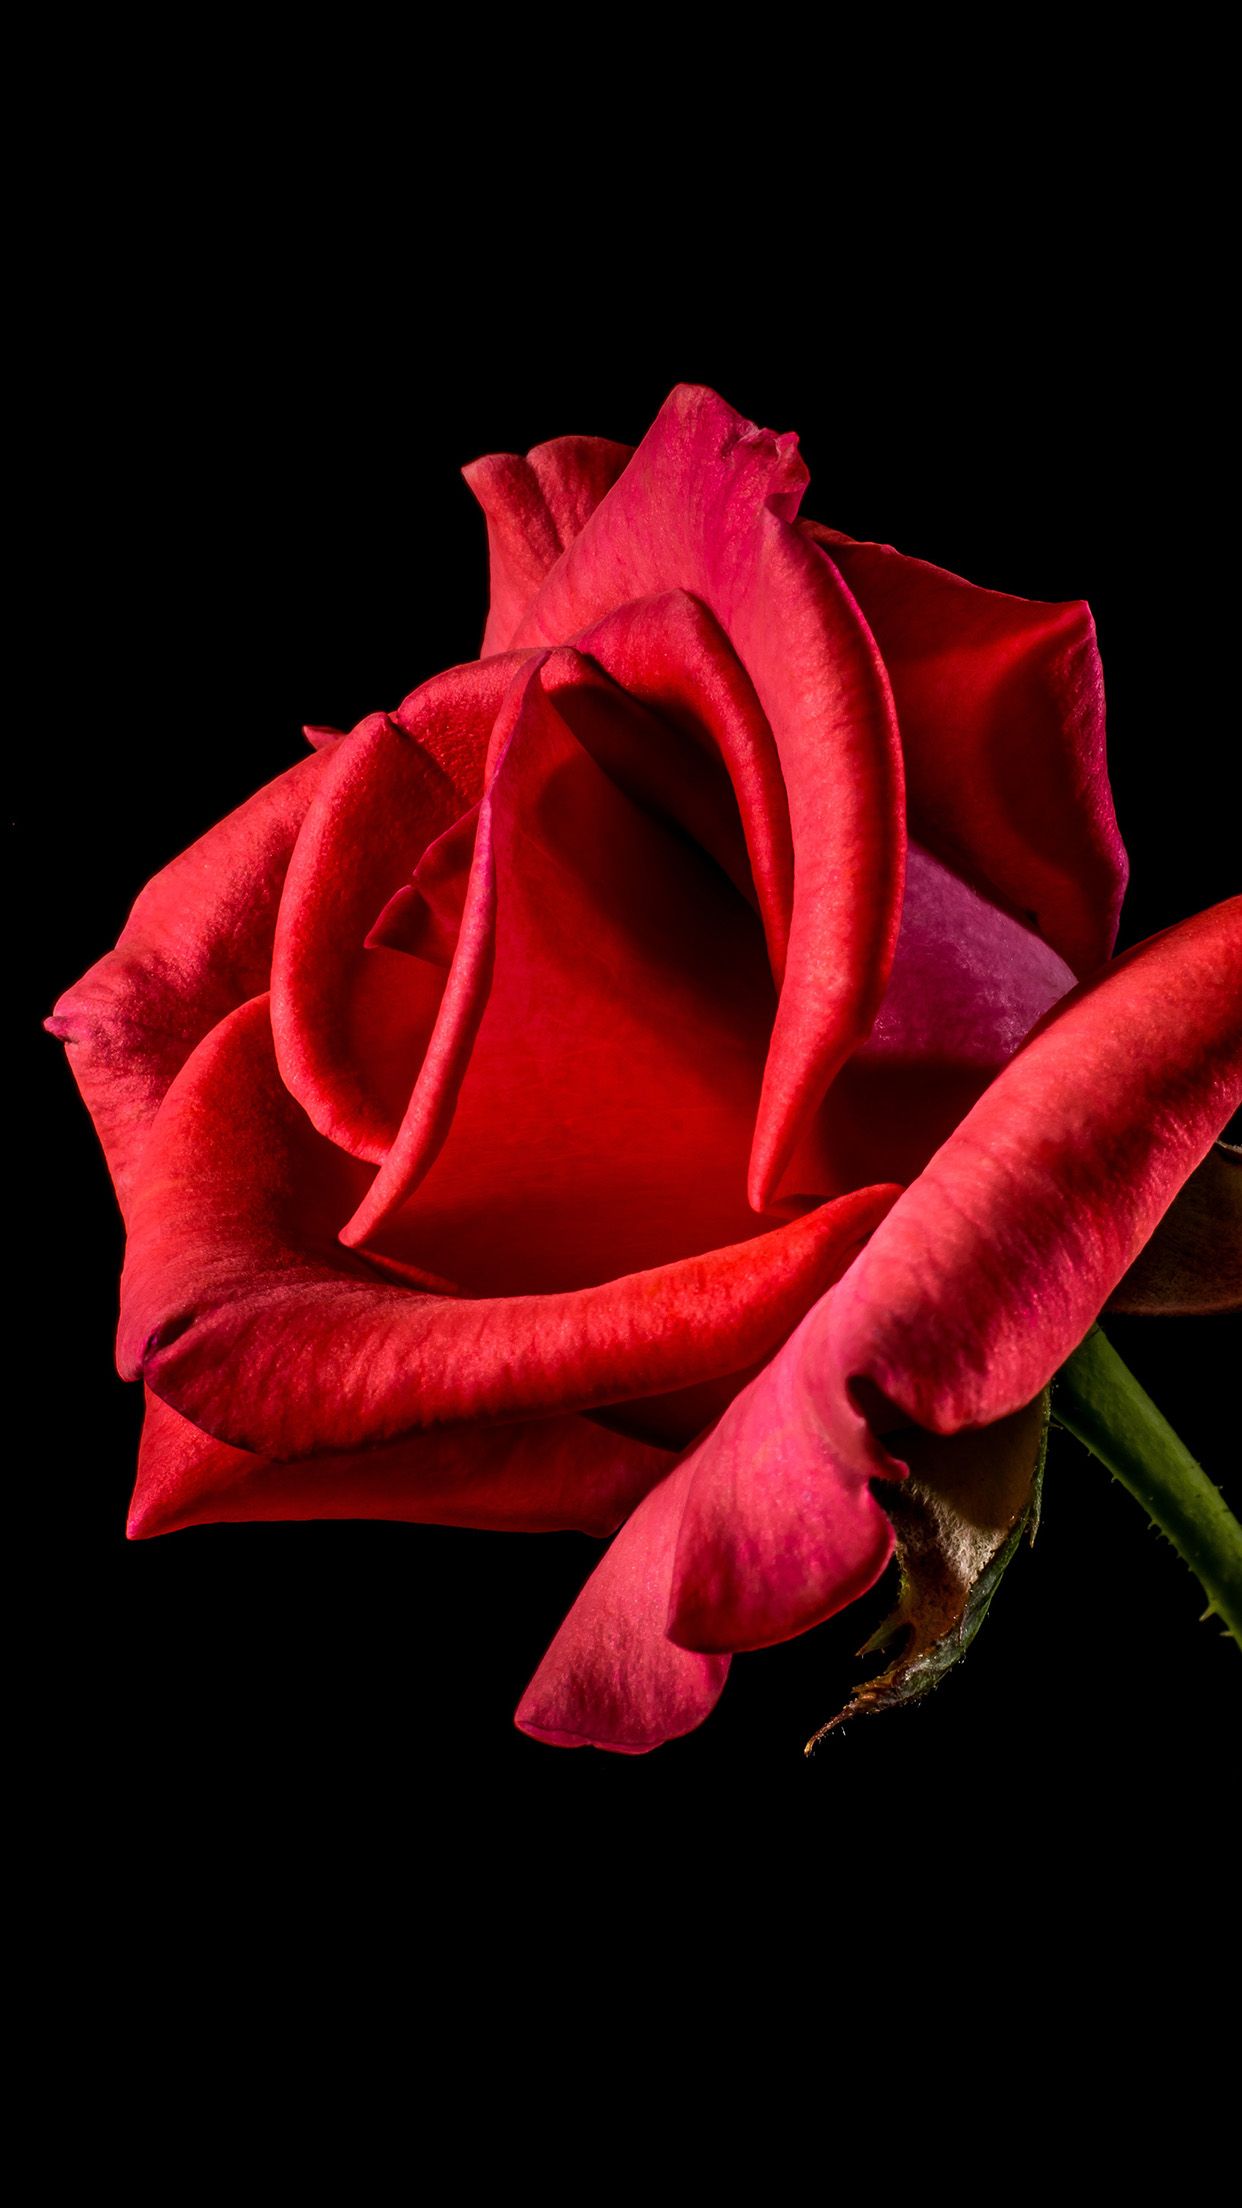 Free download Flower Rose Red Dark Beautiful Best Nature Android